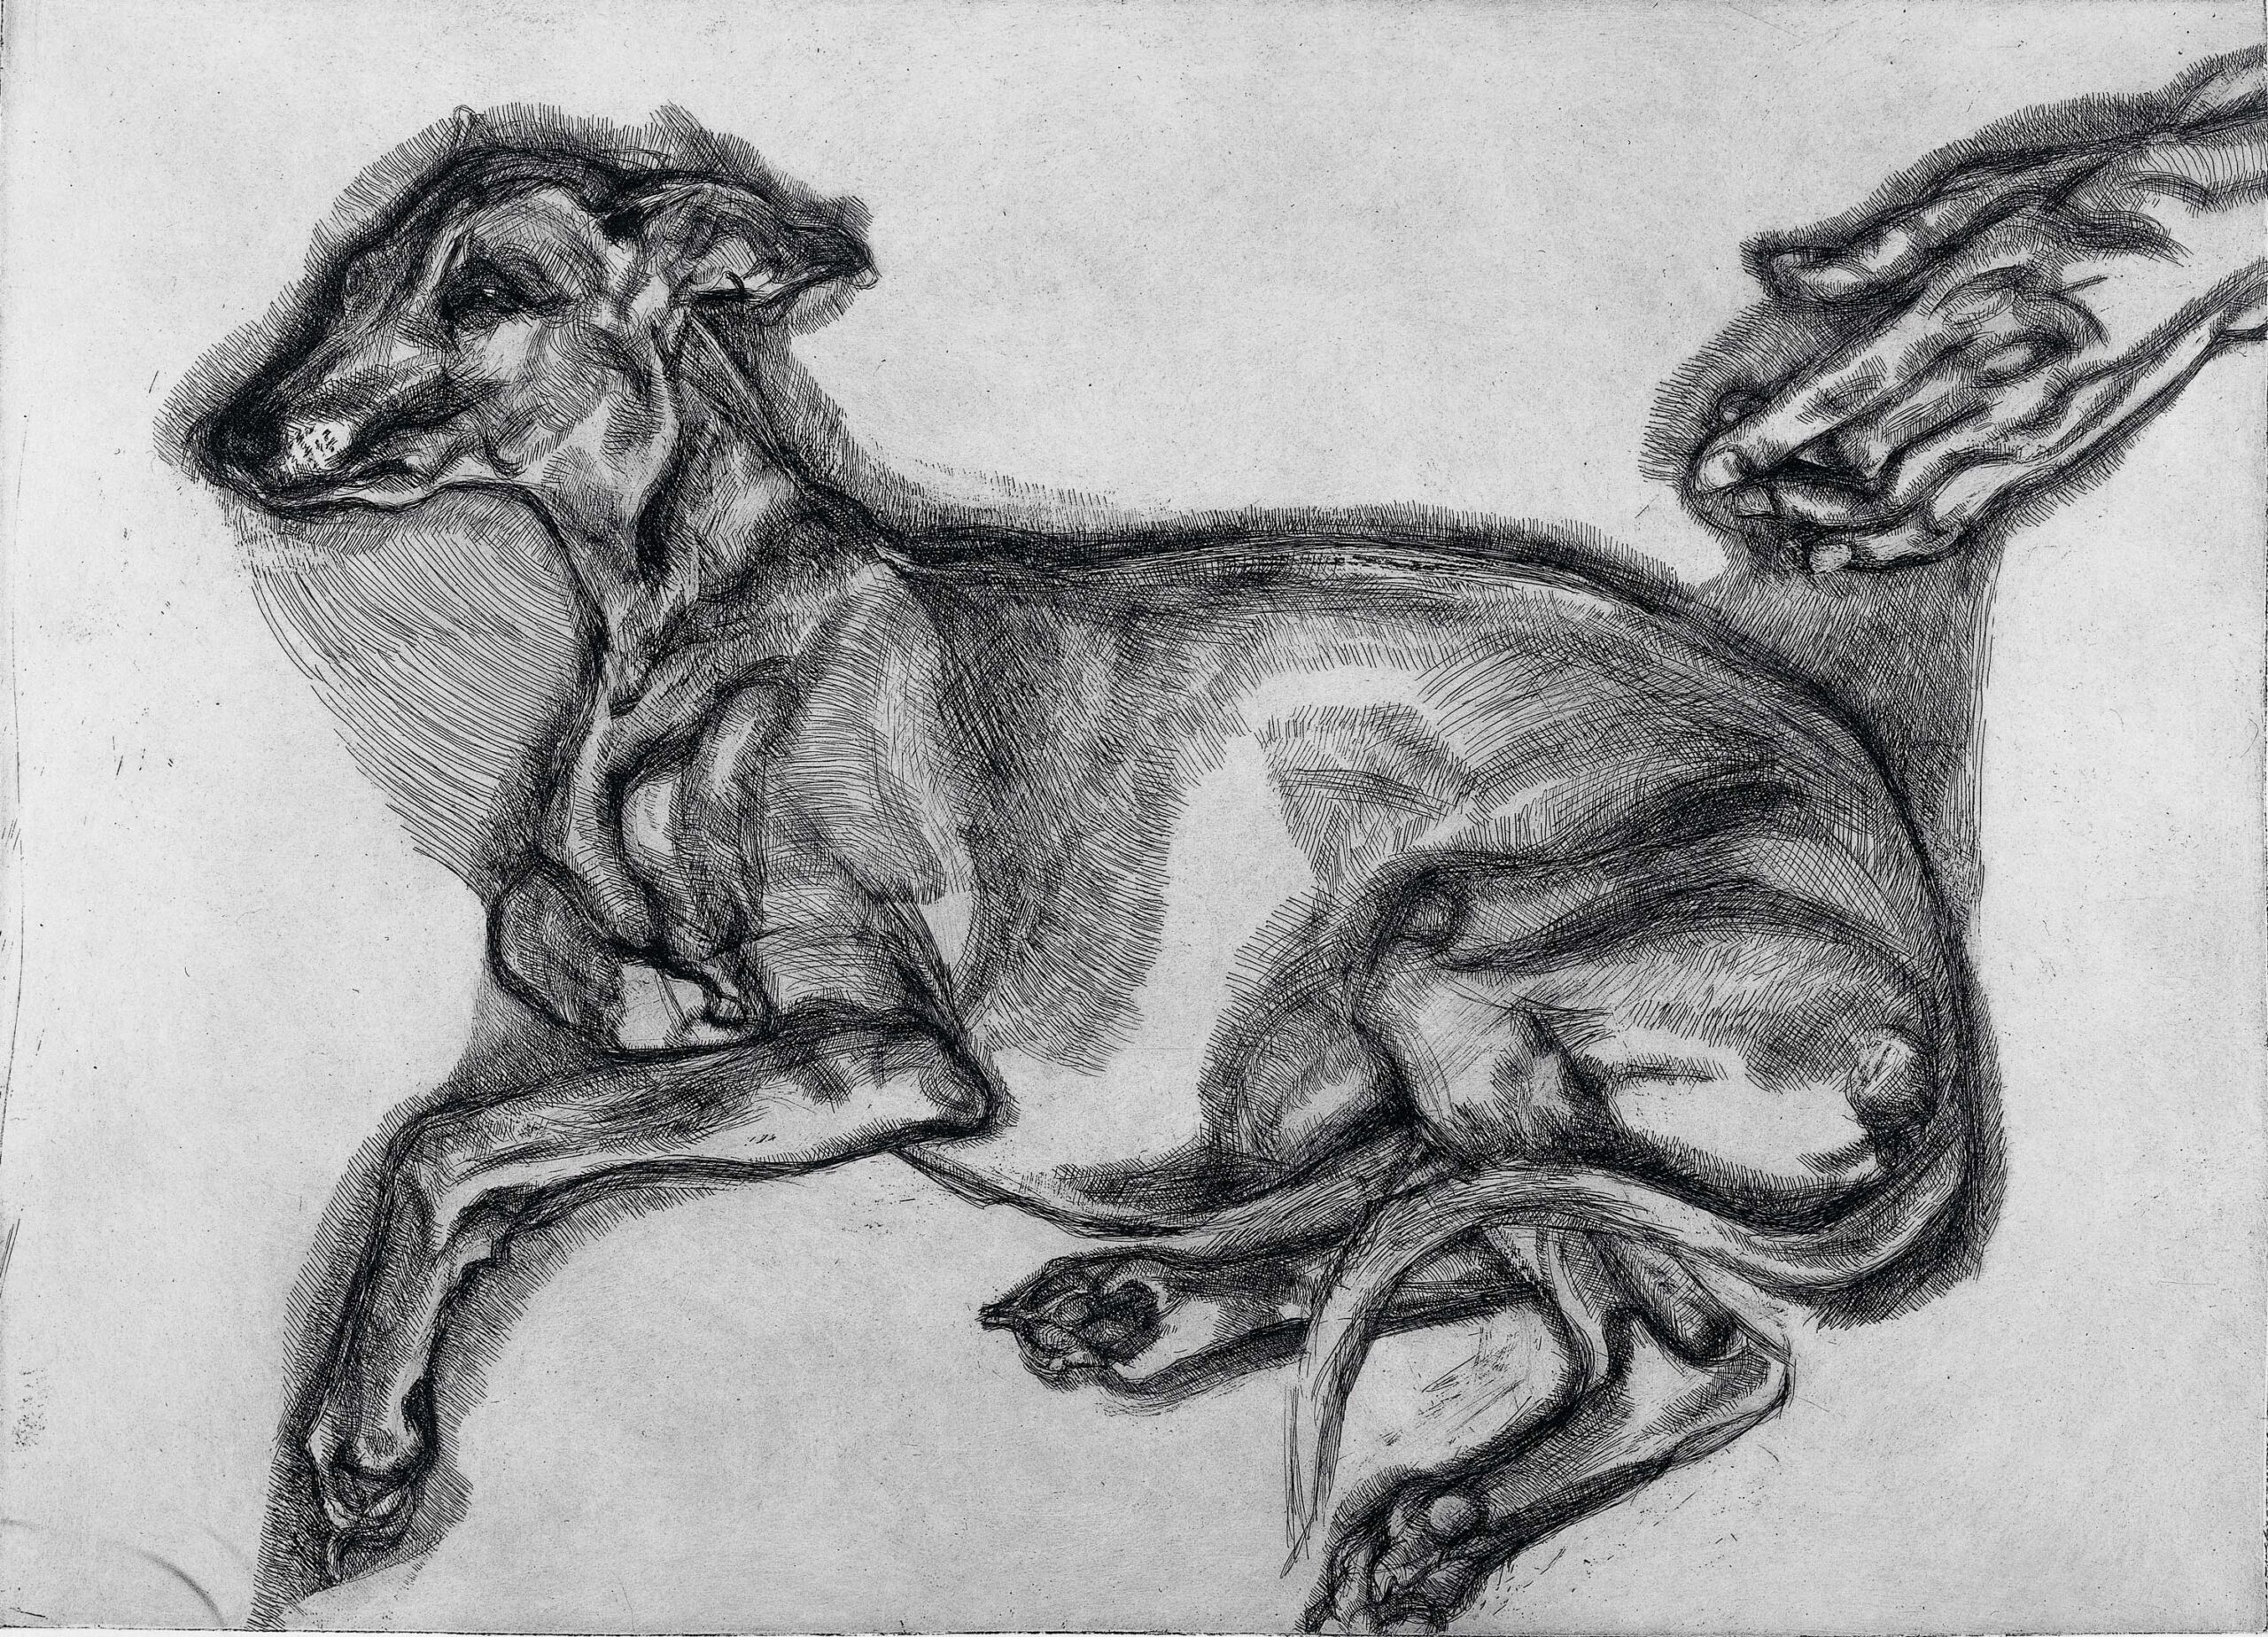 Drawing of a dog